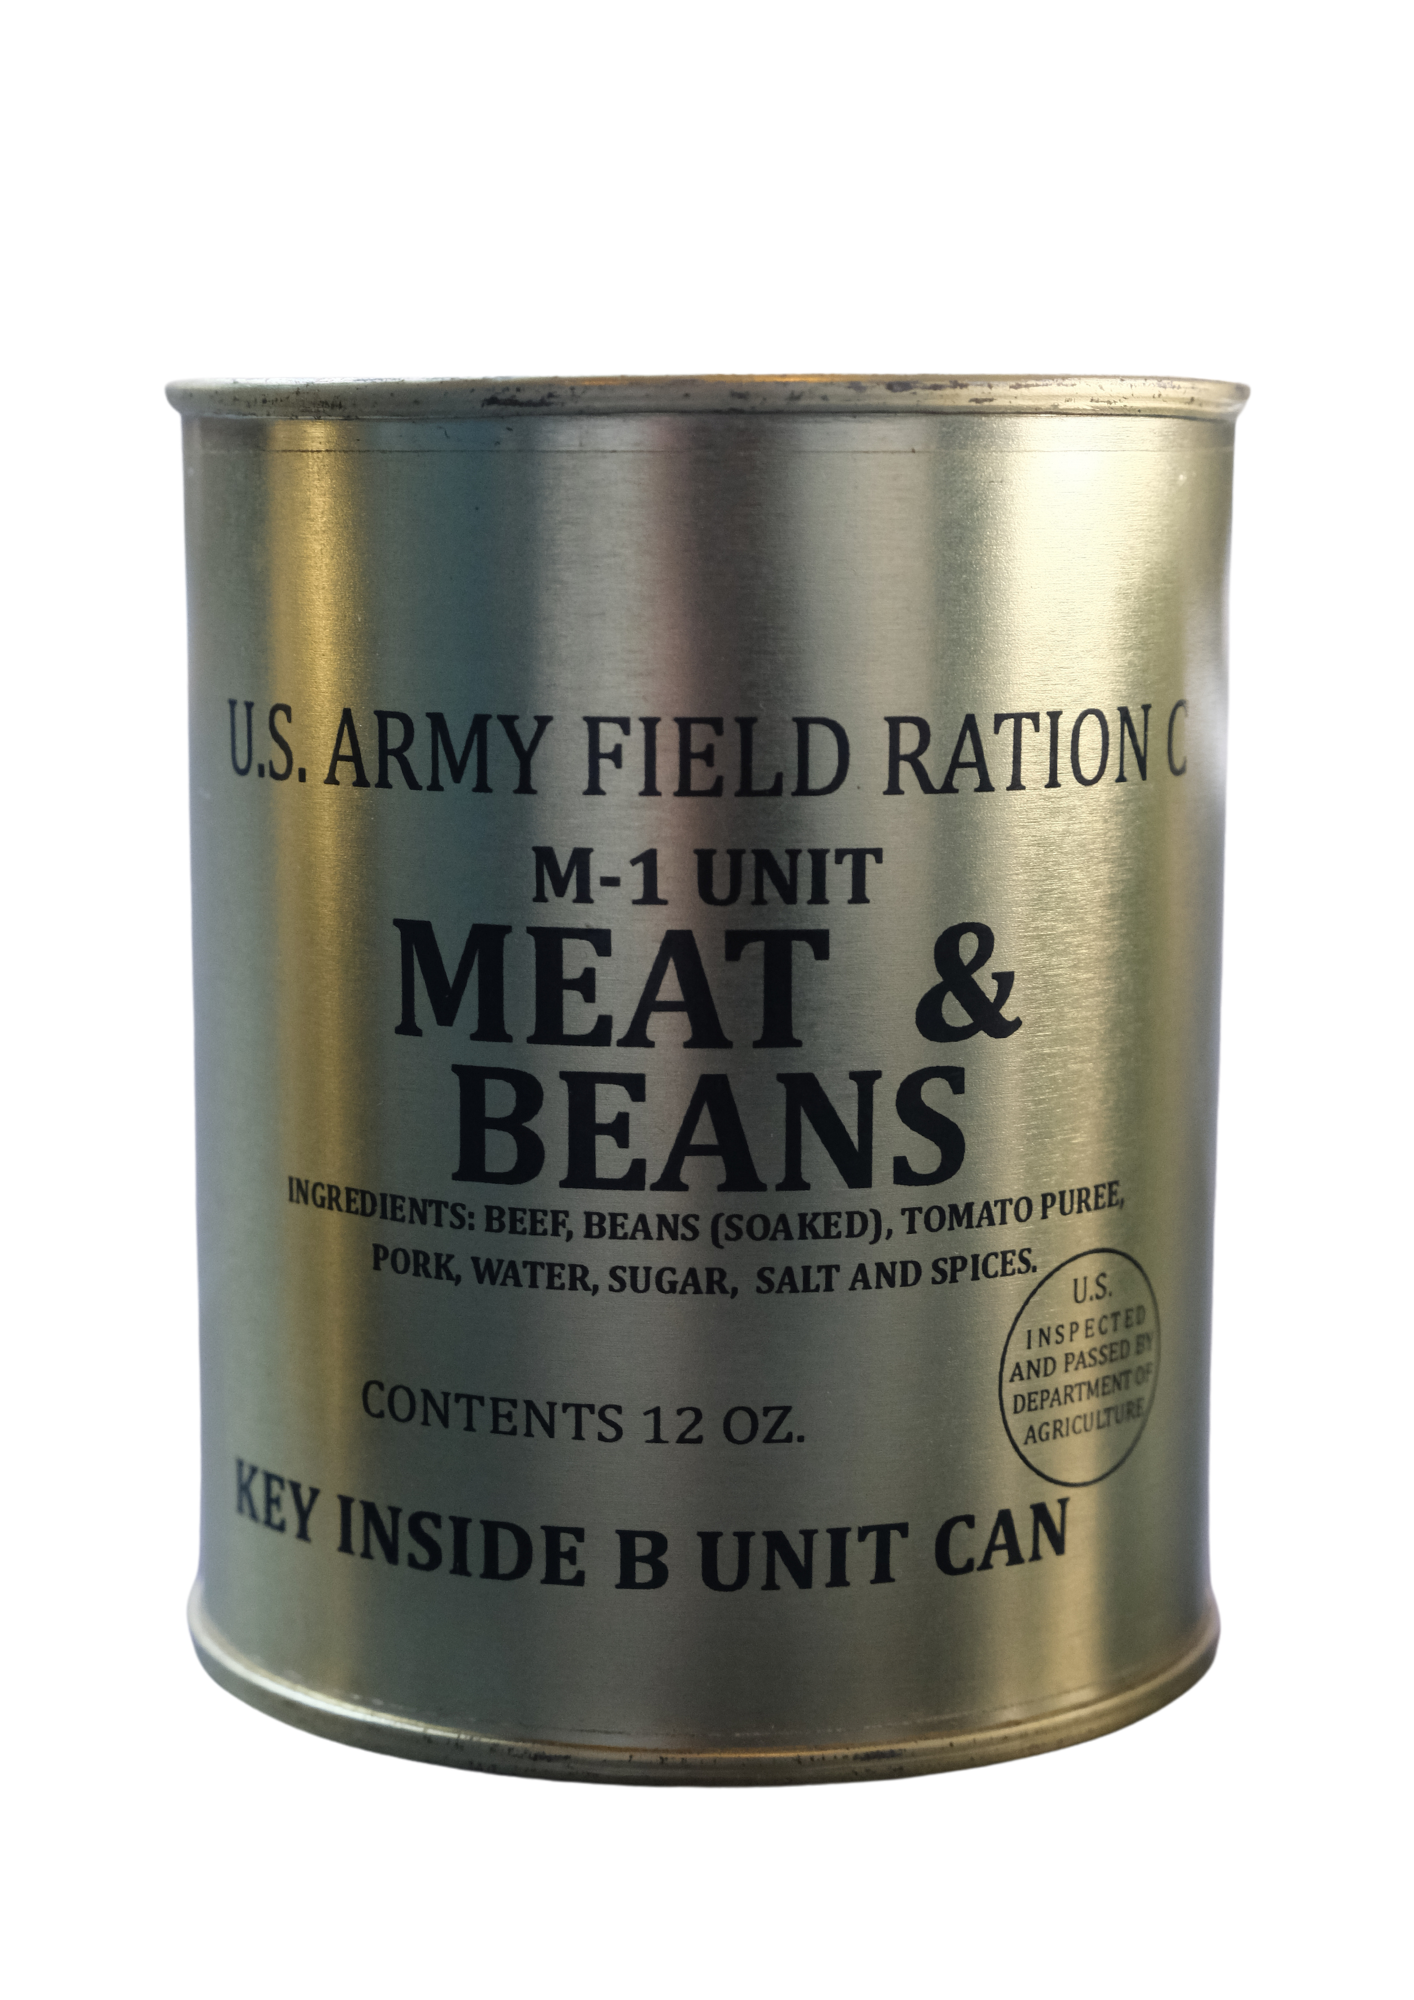 US Army Field Ration C : M-1 Unit Meat & Bean